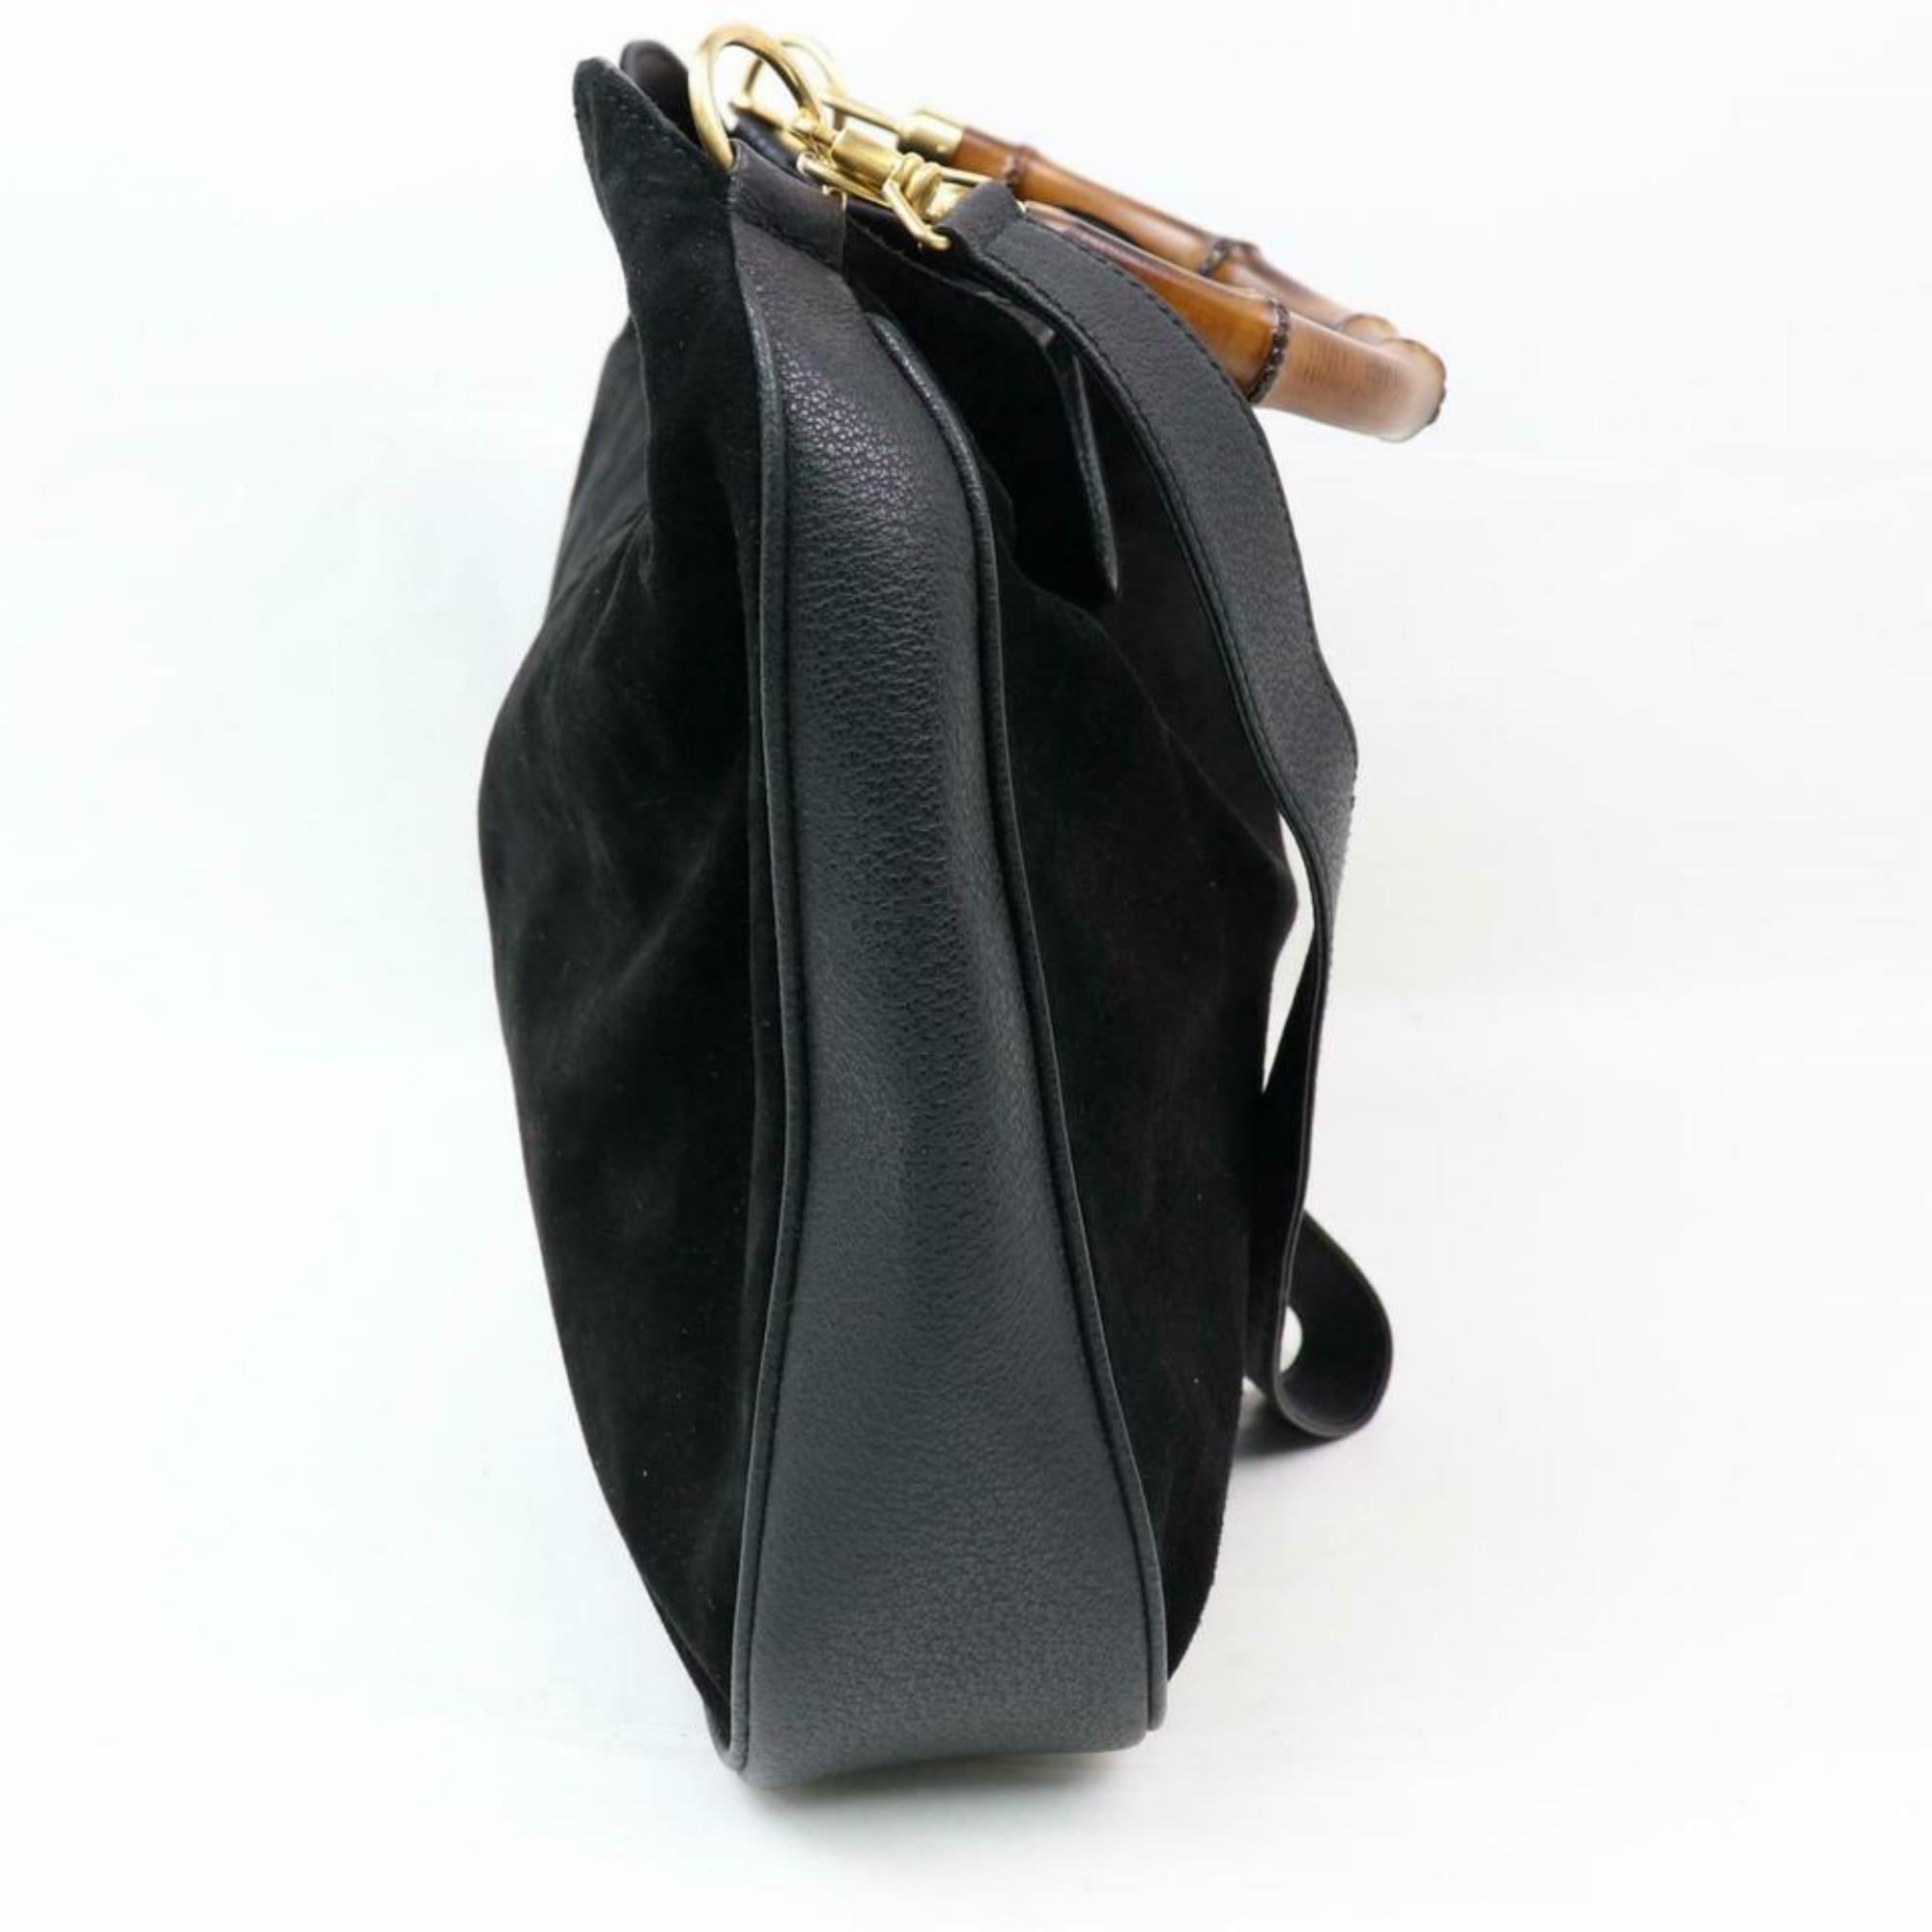 Gucci Bamboo 2way Hobo 870254 Black Suede Leather Shoulder Bag For Sale 4